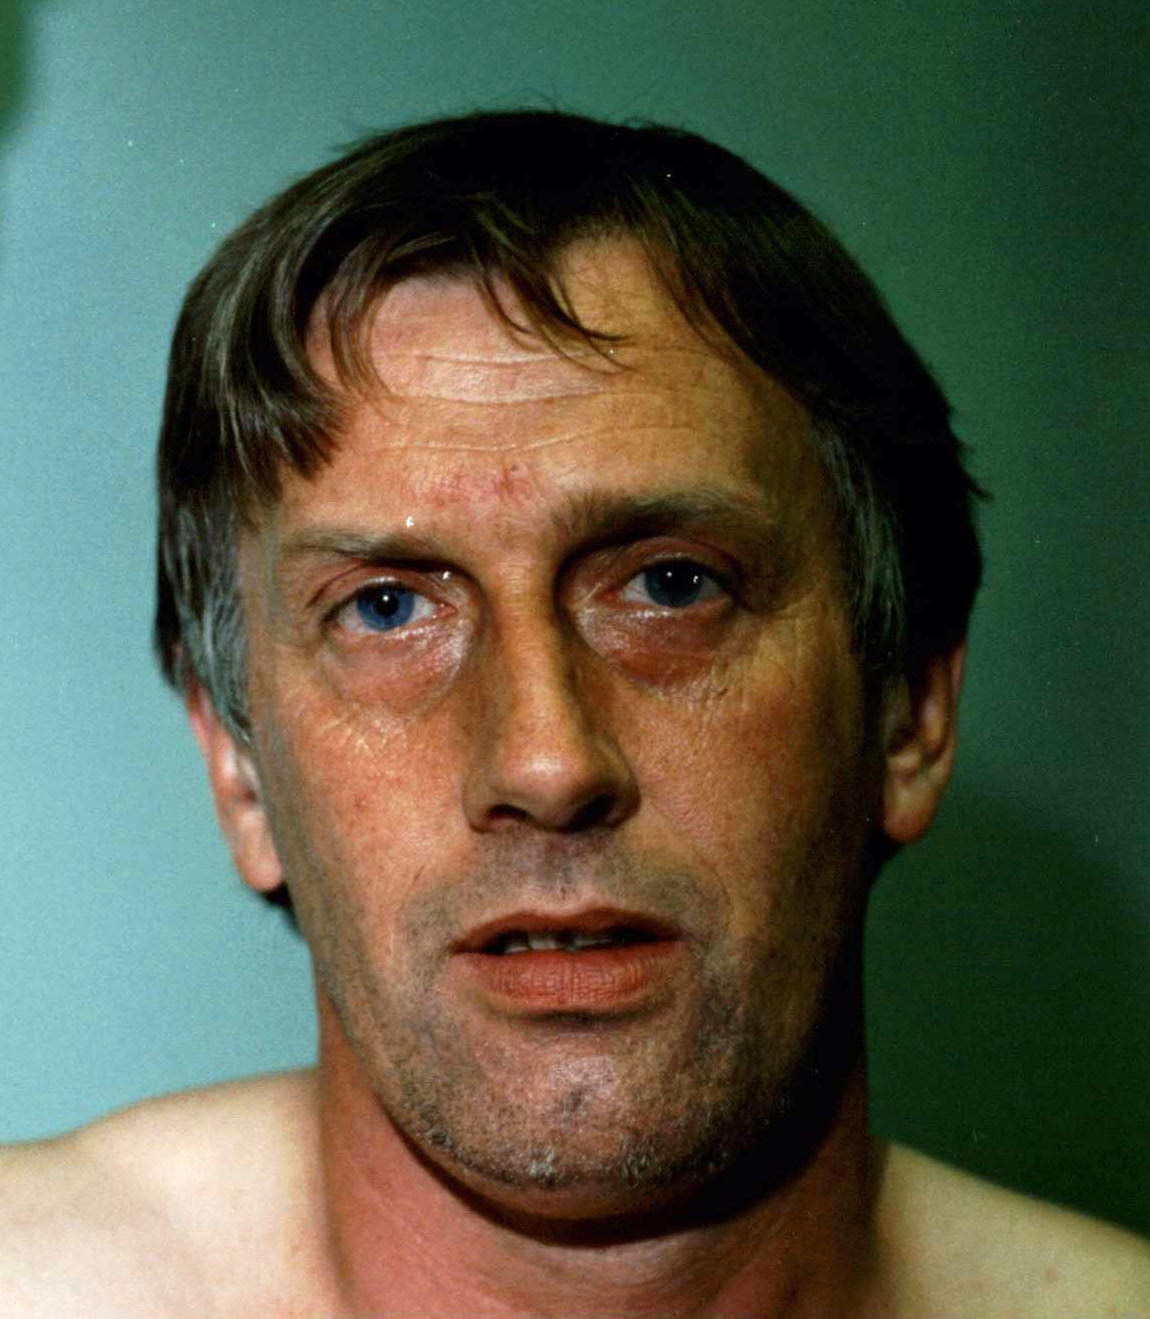 Whiting was left with a six-inch scar on his right cheek after he was attacked with a razor in 2002